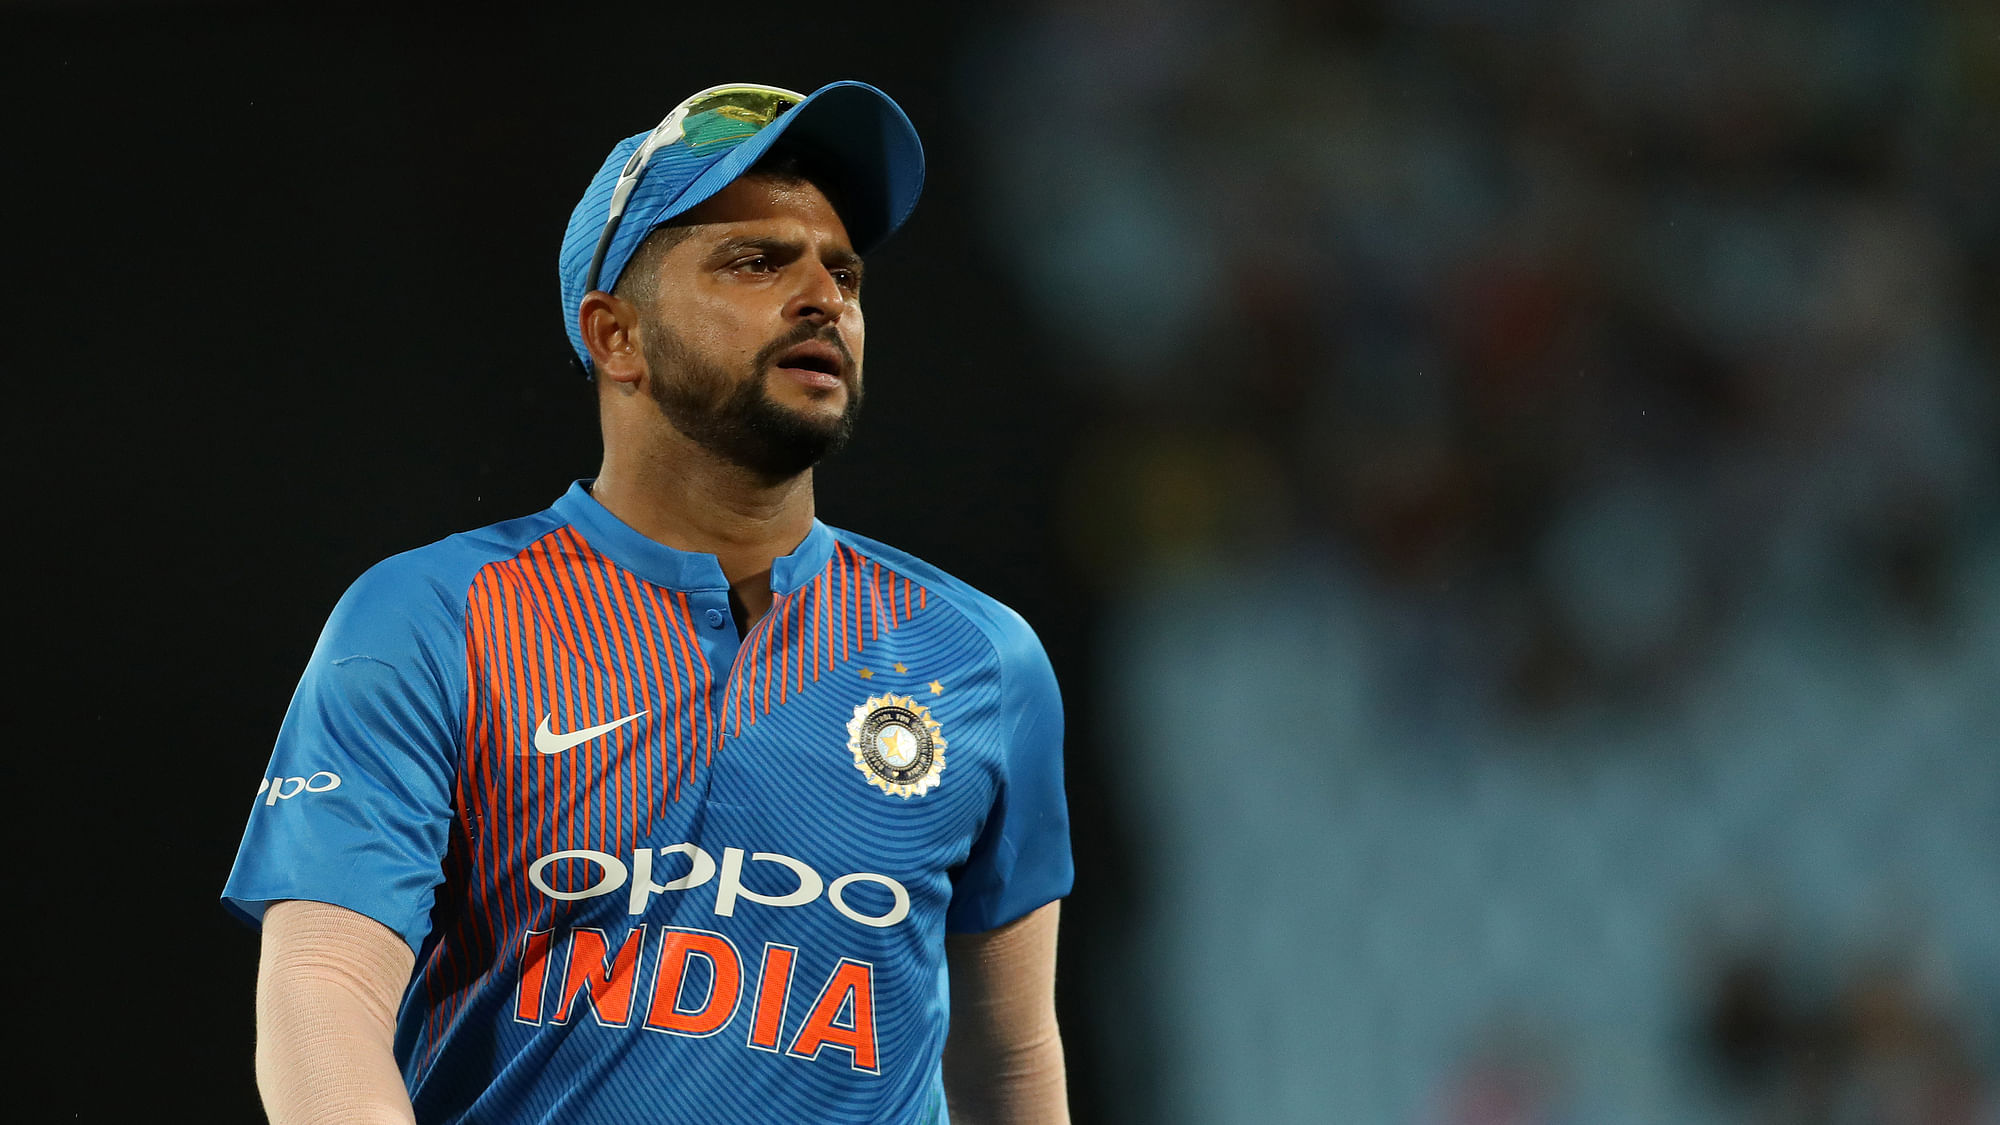 Suresh Raina says he wants to use the opportunity to regain his place in ODIs ahead of the 2019 World Cup.